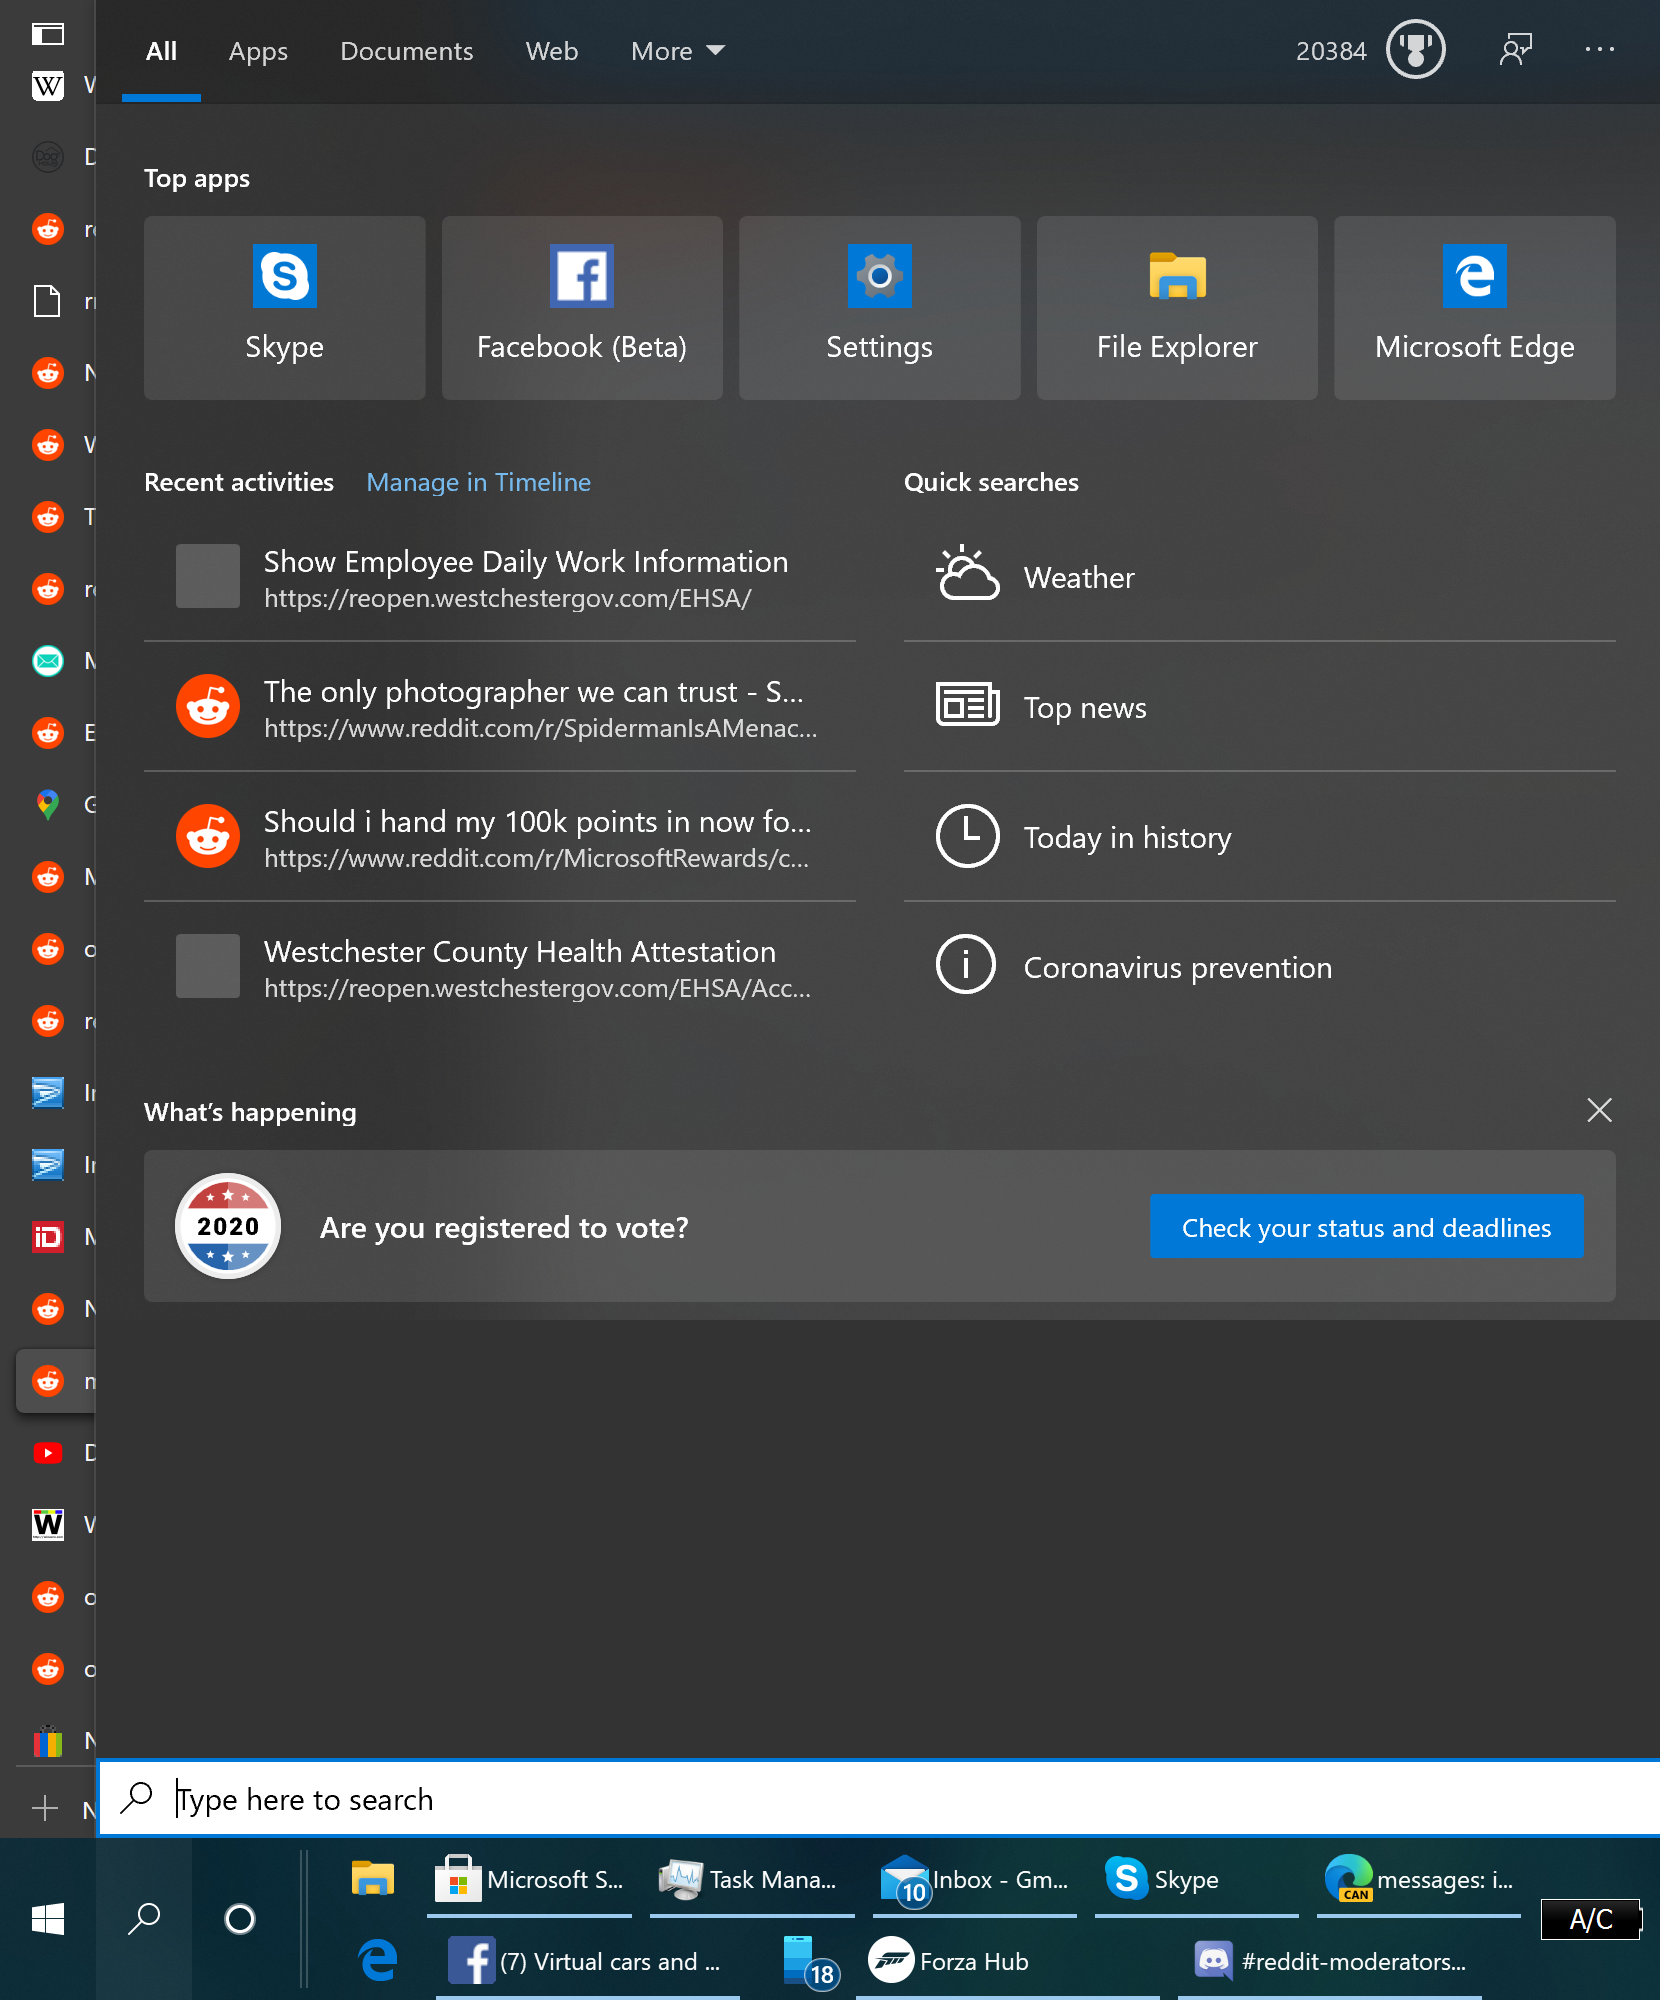 Windows 10 S Search Feature Once Again Going Crazy Windows Mode - windows 10 roblox studio app reddit